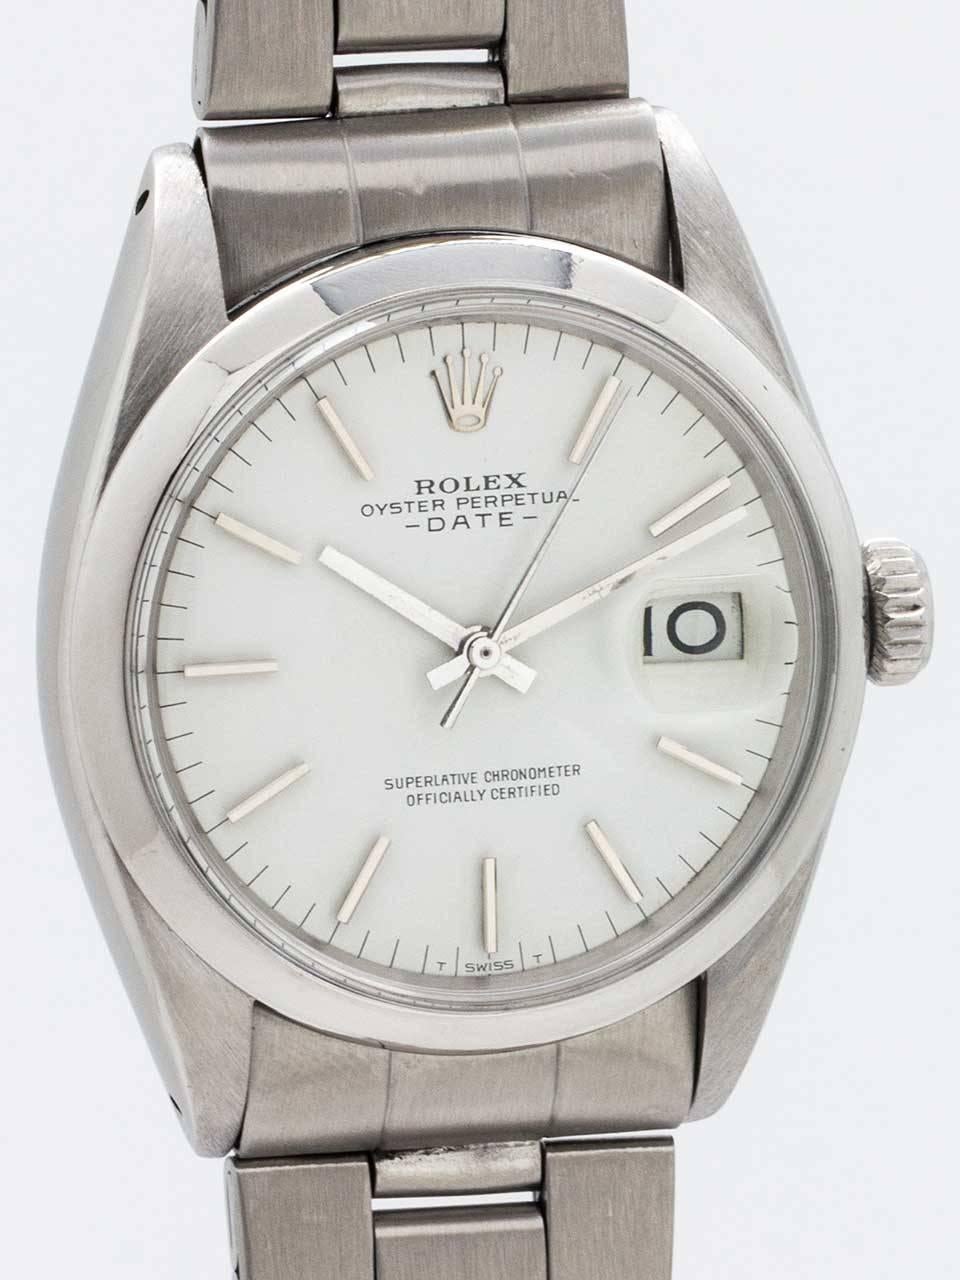 Rolex Stainless Steel Oyster Perpetual Date Wristwatch ref 1500 serial number 1.7 million circa 1968. 34mm diameter case with smooth bezel and acrylic crystal. Original snow white dial with applied silver indexes and silver baton hands. Powered by